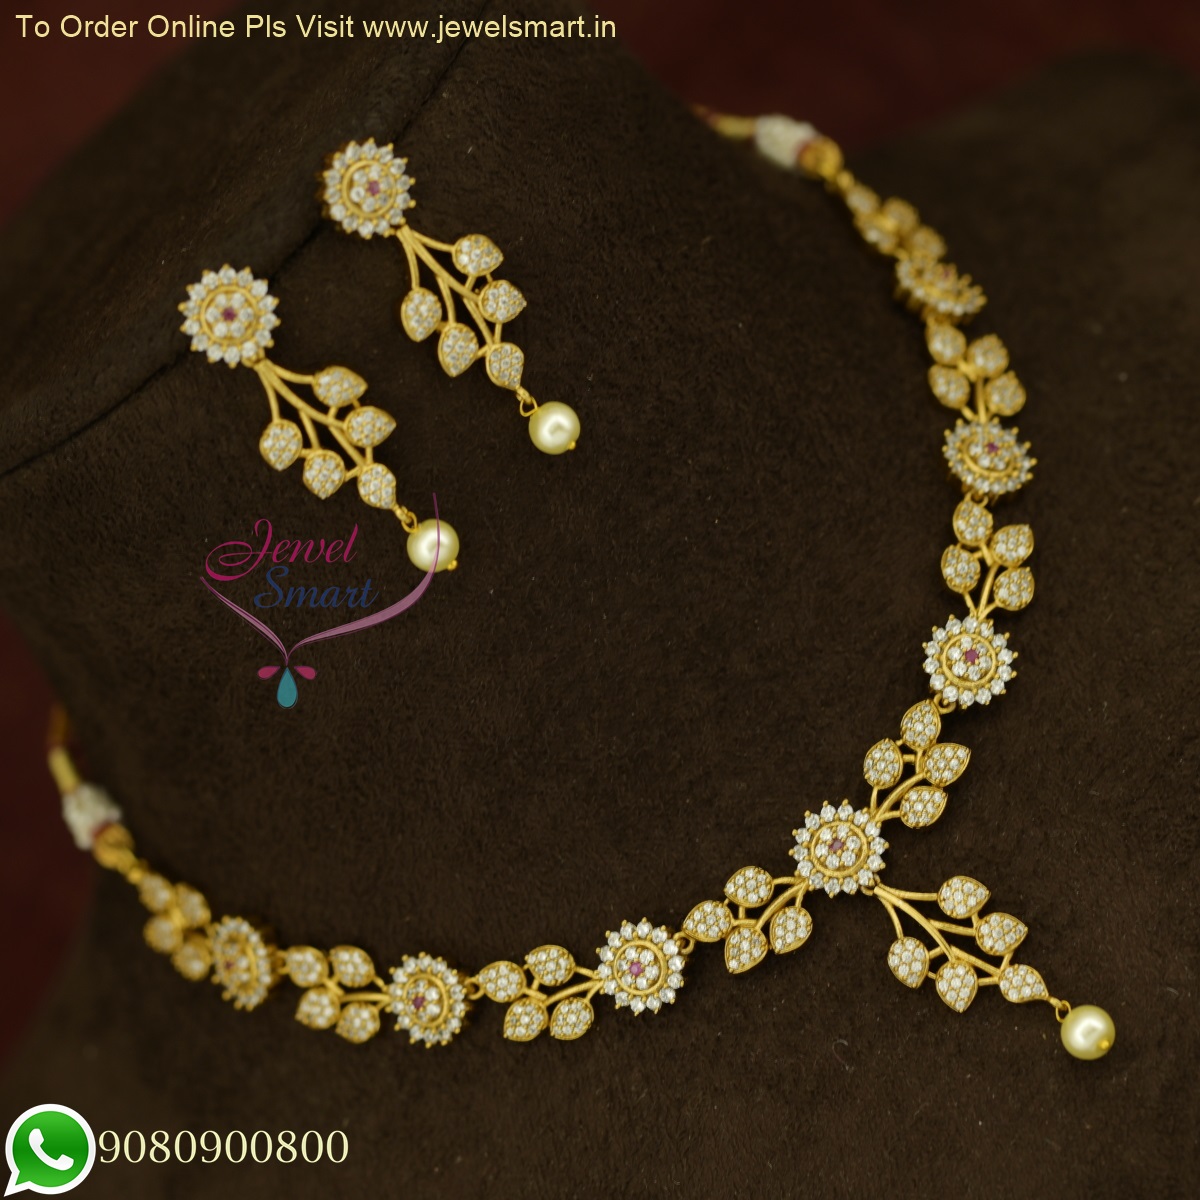 Buy Gold FashionJewellerySets for Women by Kord Store Online | Ajio.com